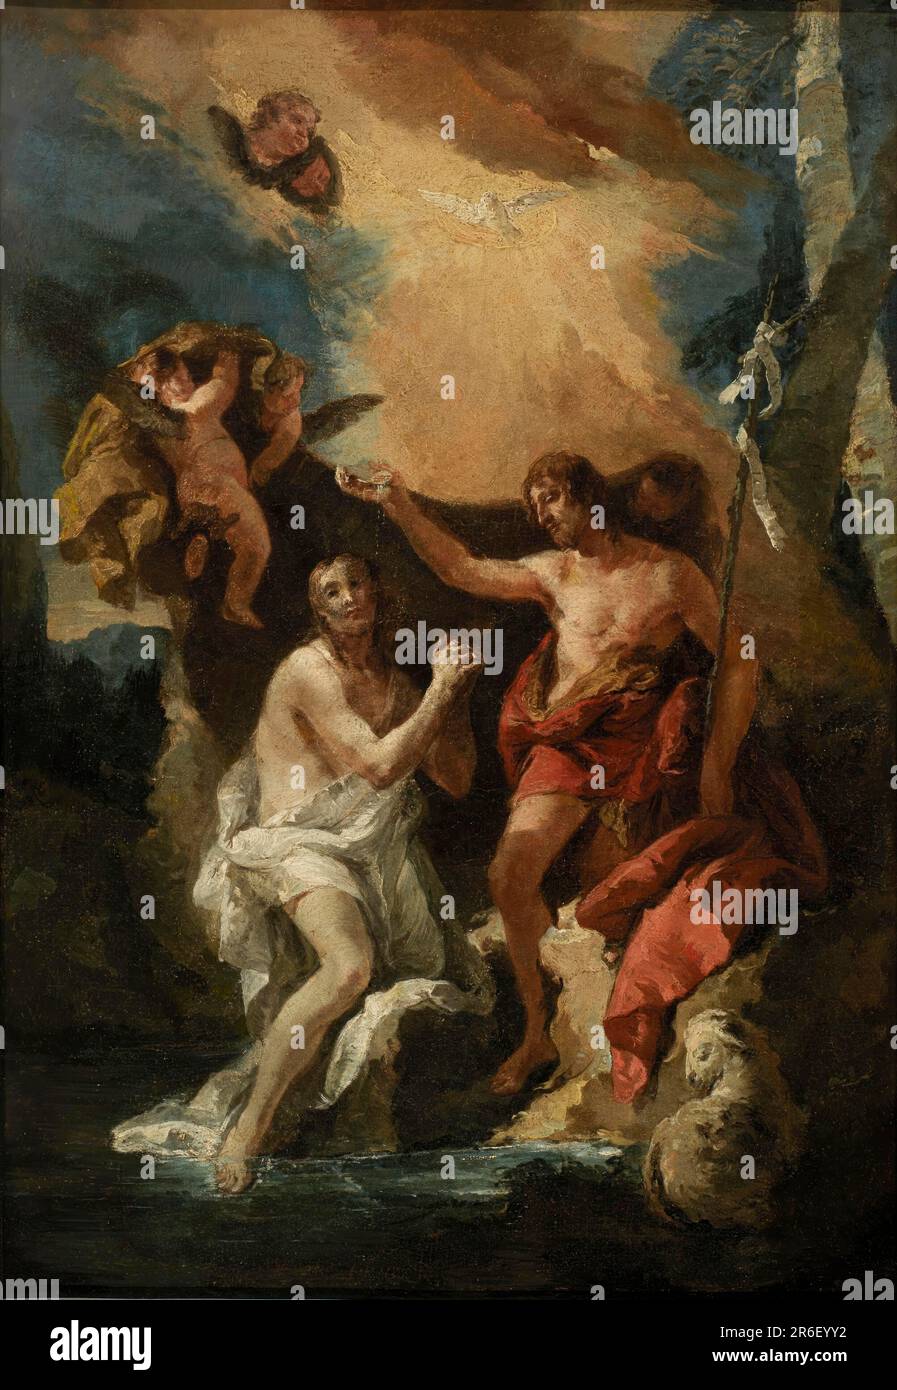 Baptism of Christ. Date: 18th century. oil on wood. Museum: Smithsonian American Art Museum. Stock Photo